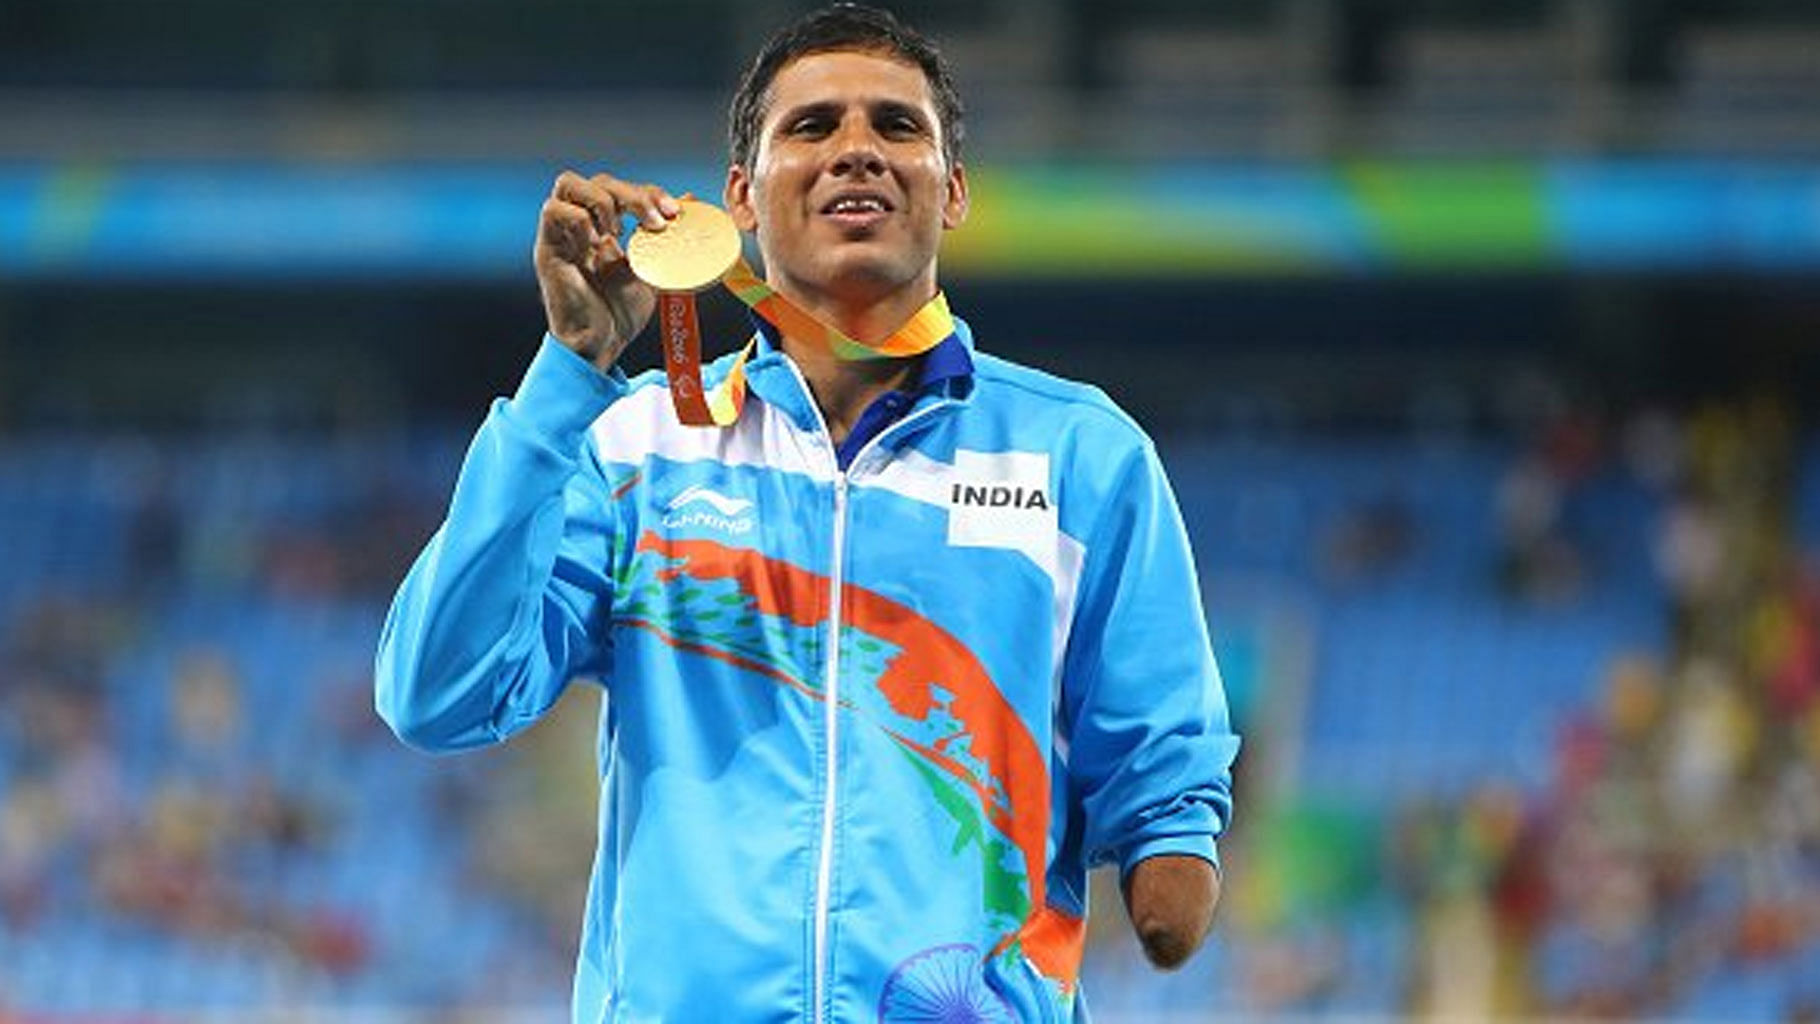 India’s Javelin thrower Devendra Jhajharia holds up his gold medal at the Rio Paralympics. (Photo Courtesy: Twitter/<a href="https://twitter.com/IPCAthletics">@IPC Athletics</a>)